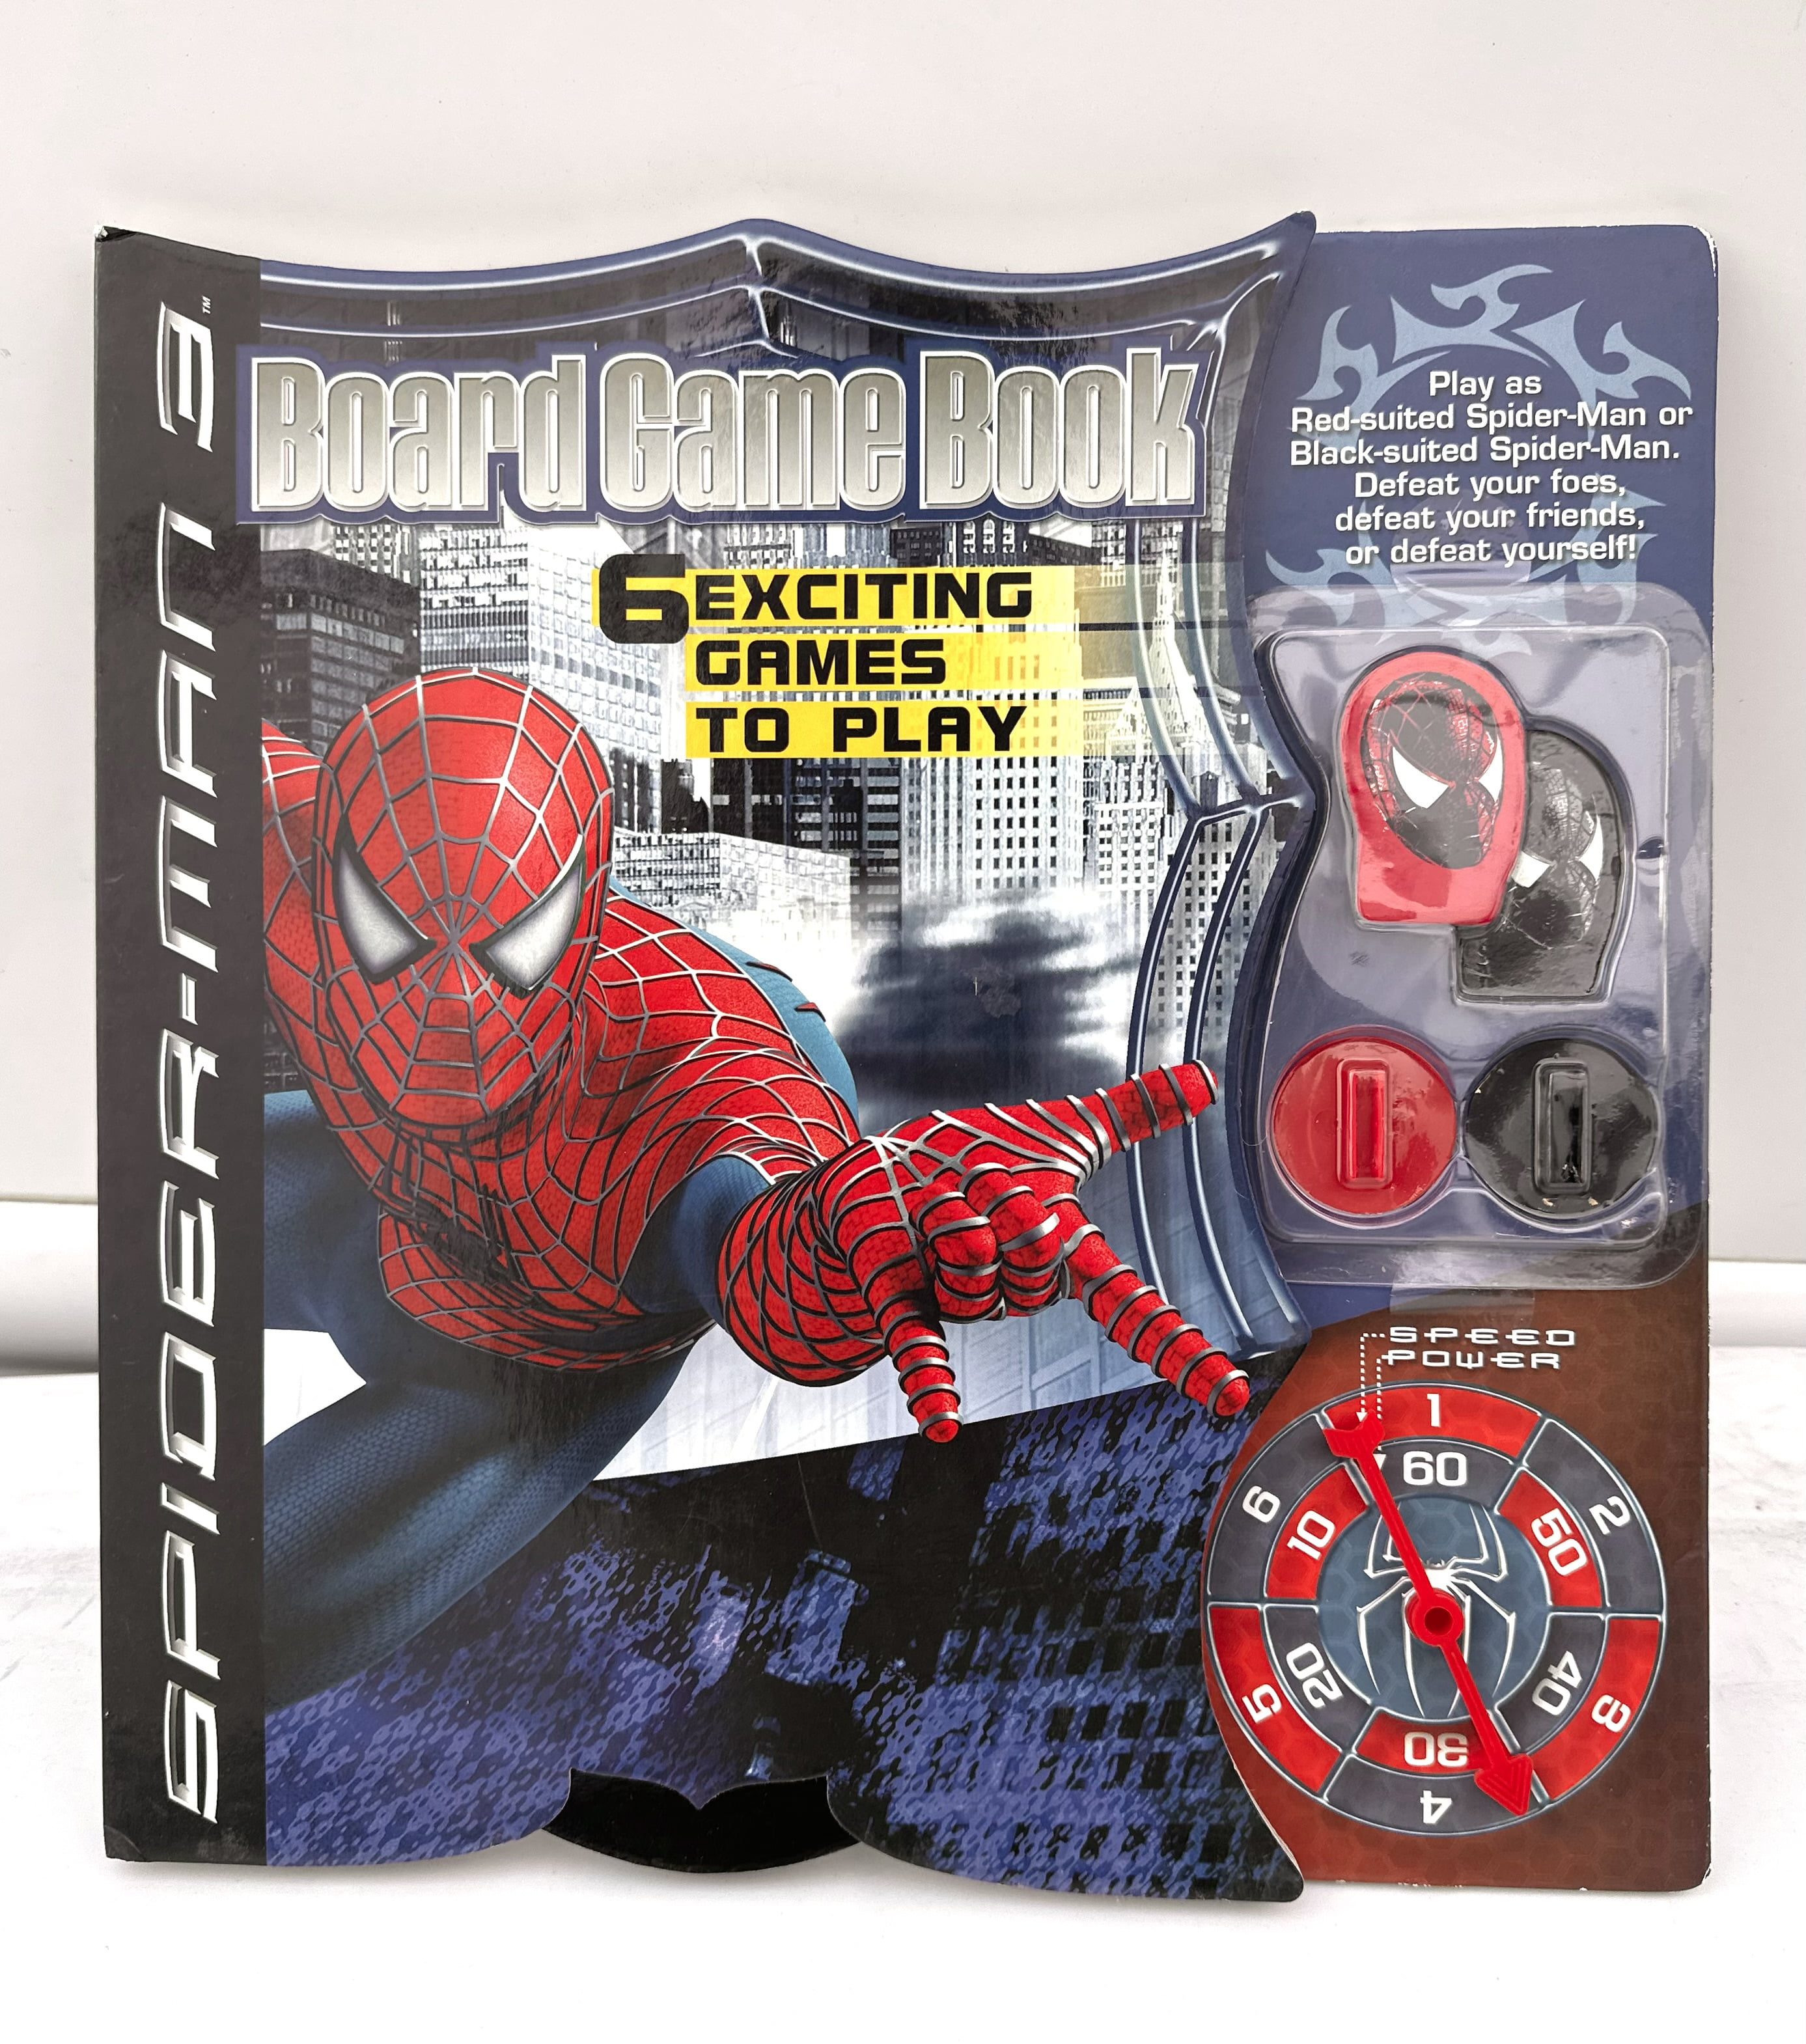 Spiderman Board Game Book - 6 Exciting Games To Play. 